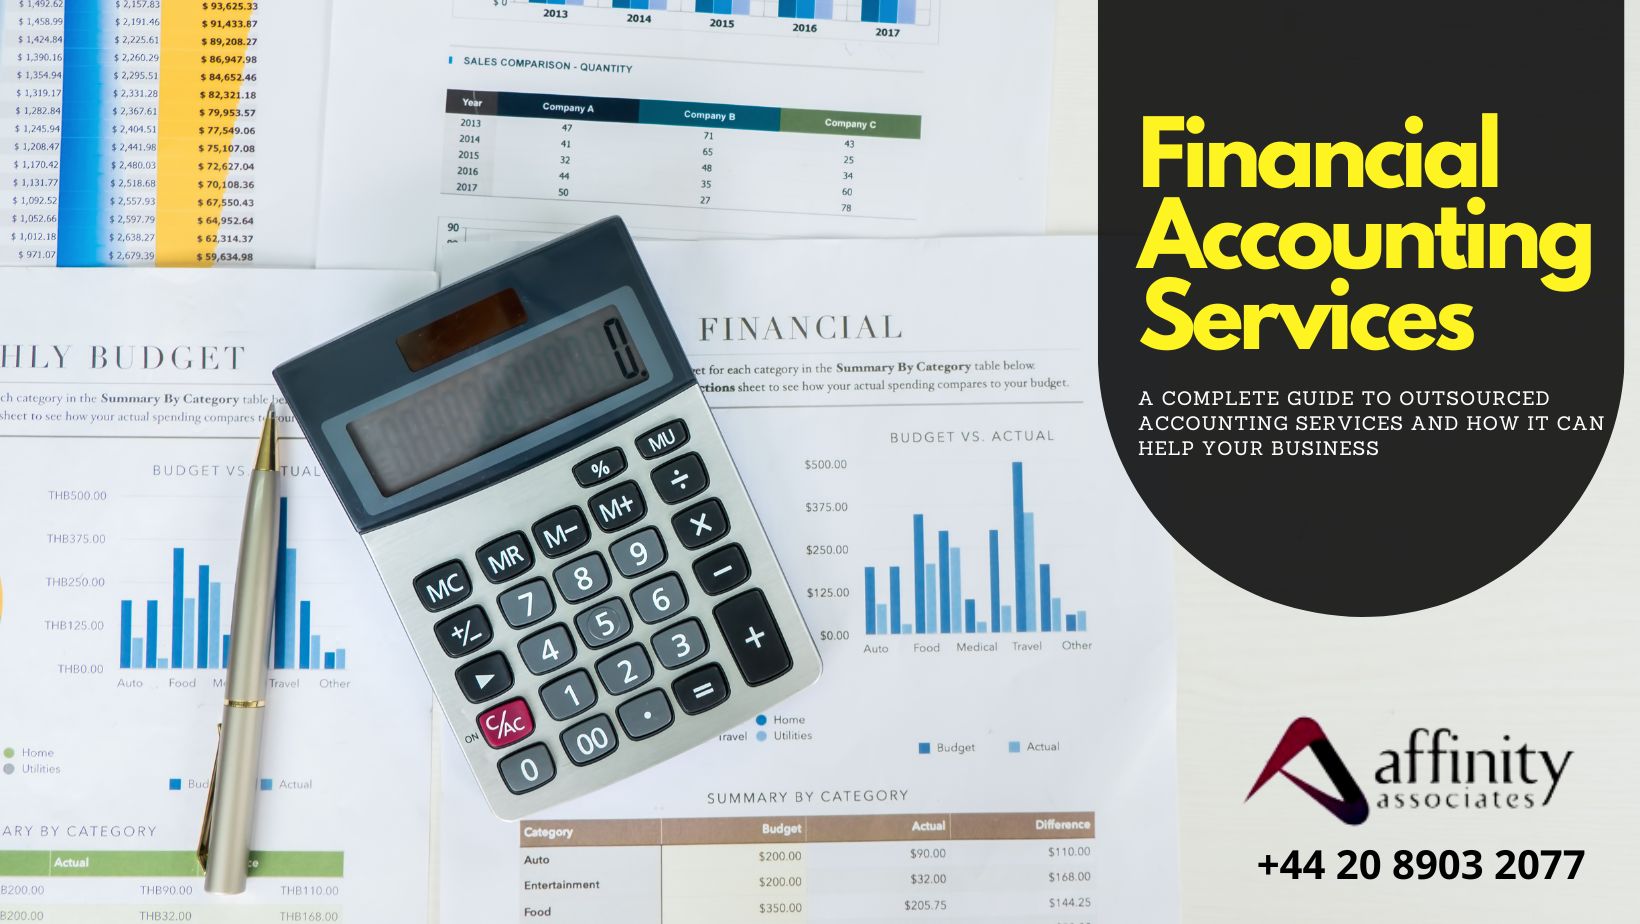 Financial Accounting Services – A Complete Guide to Outsourced Accounting Services